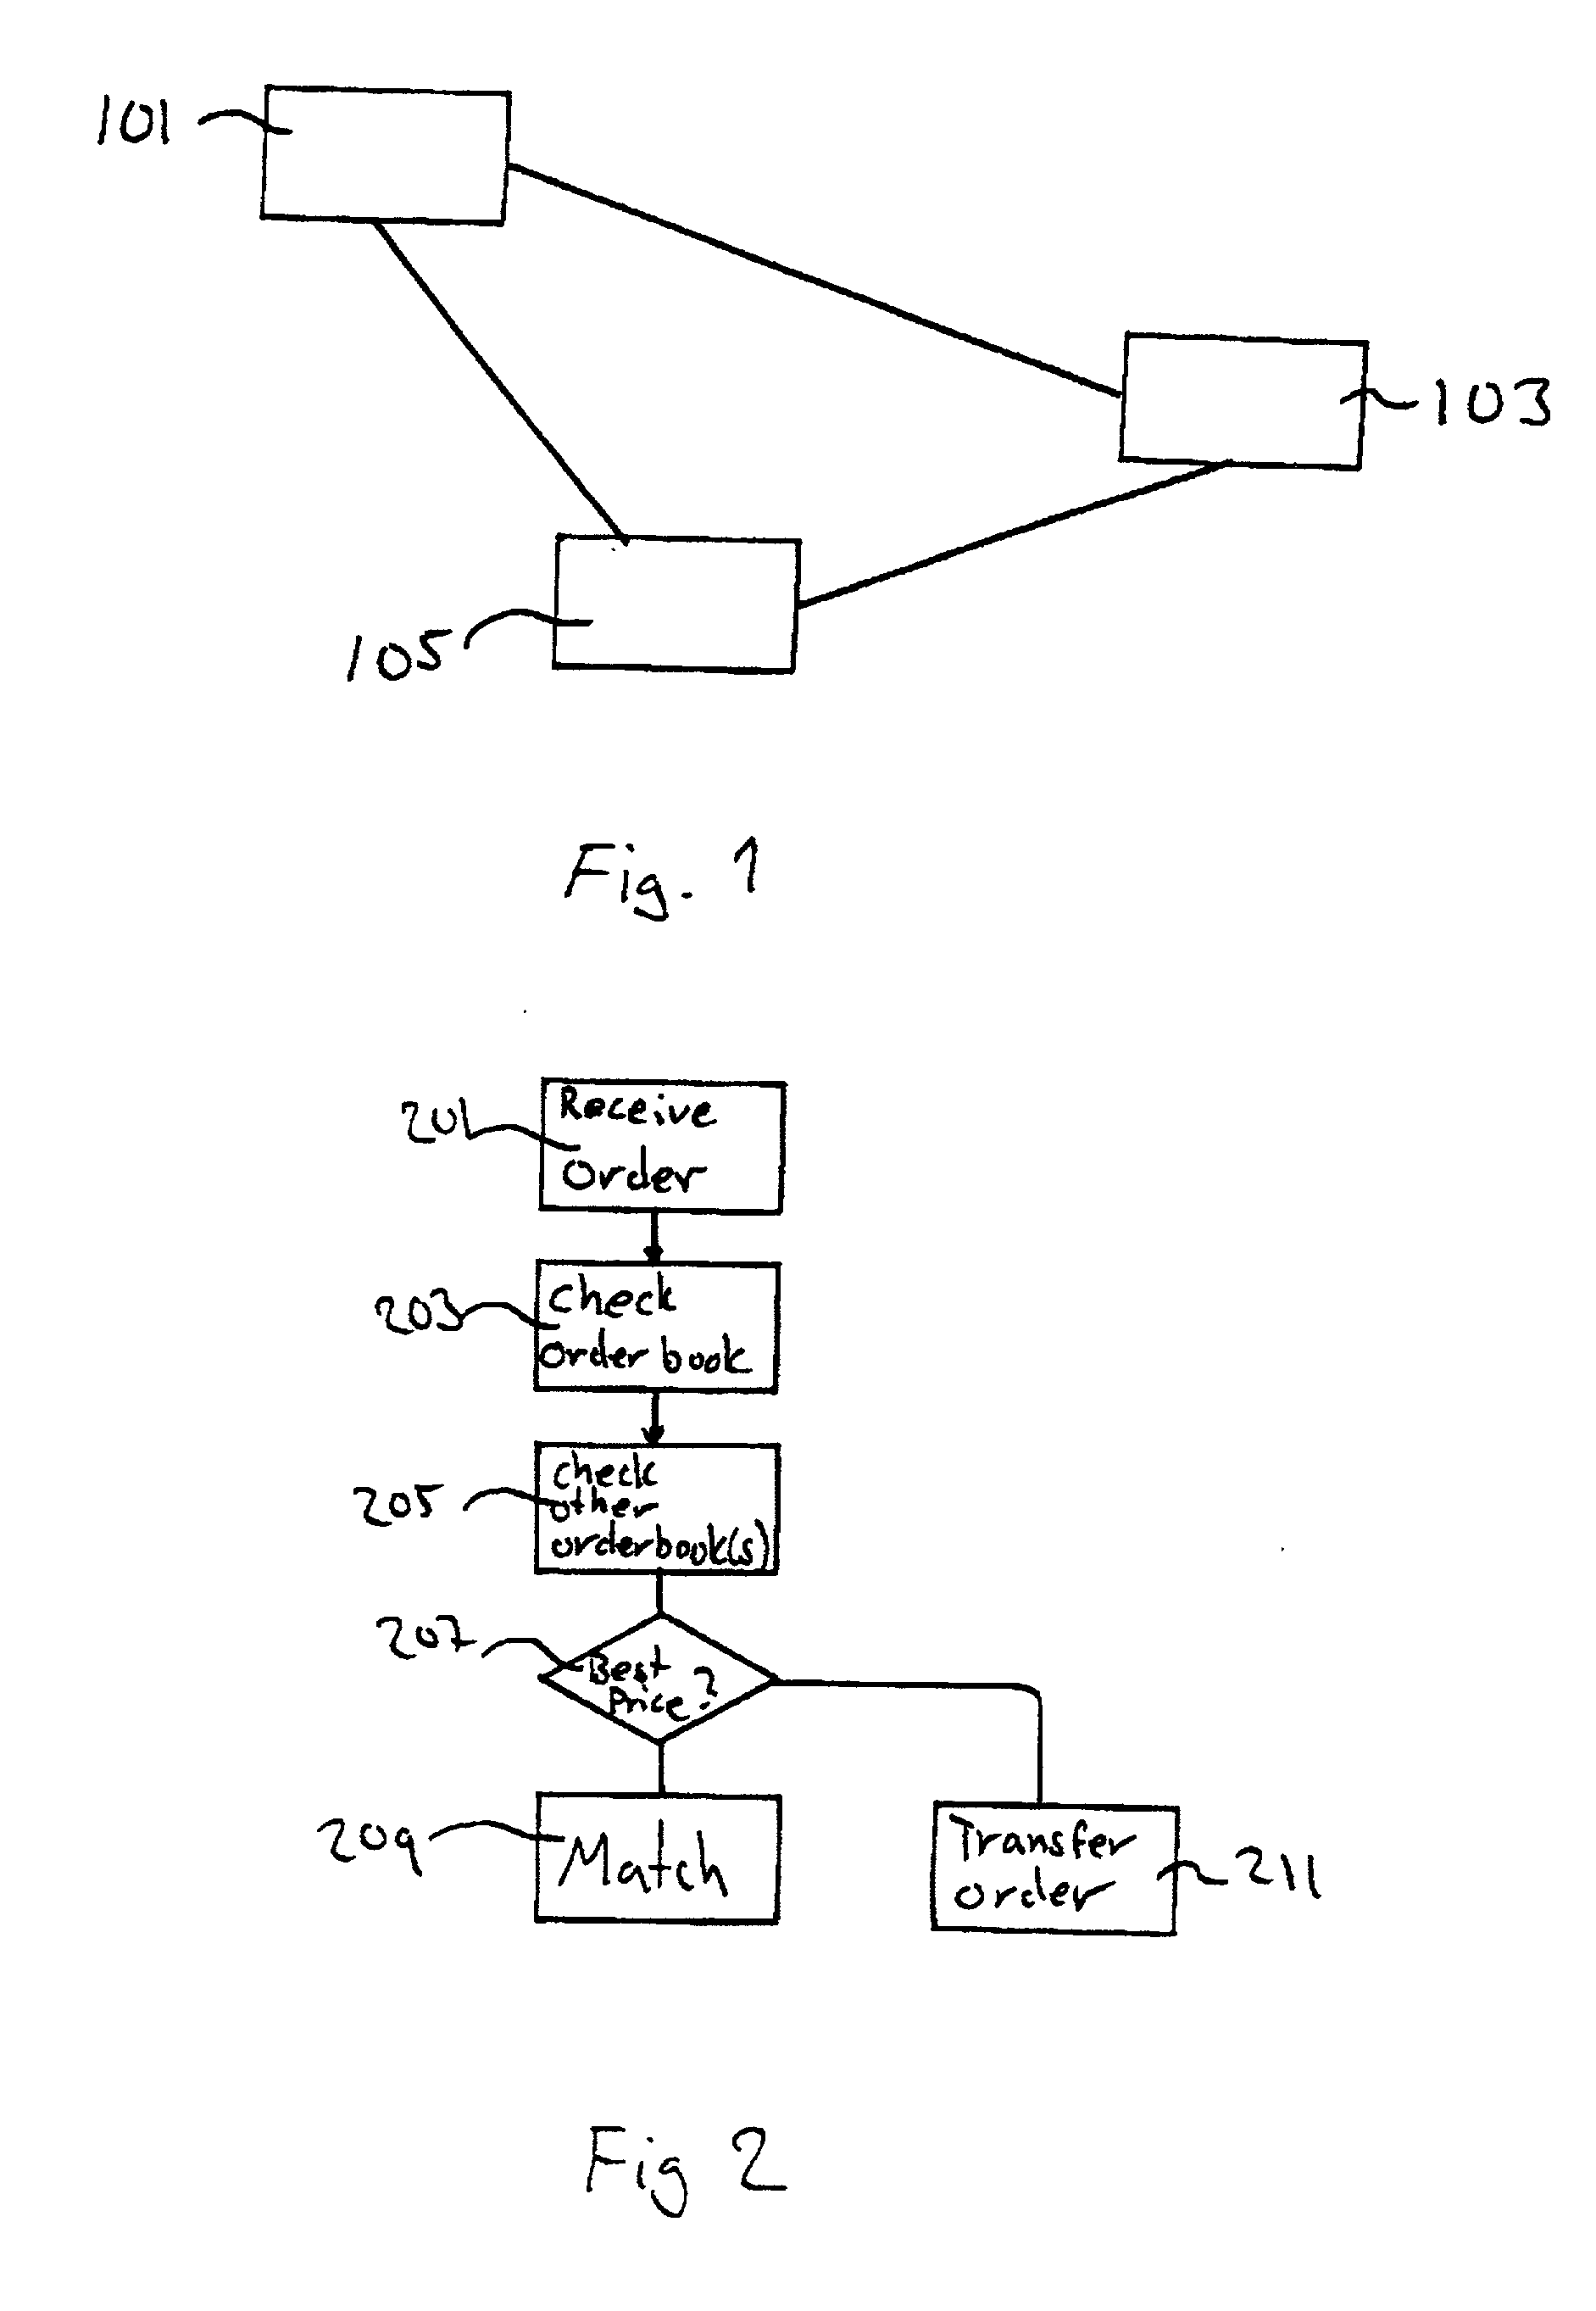 A method and apparatus for setting a price for a security on an automated exchange based on a comparison of prices on other exchanges